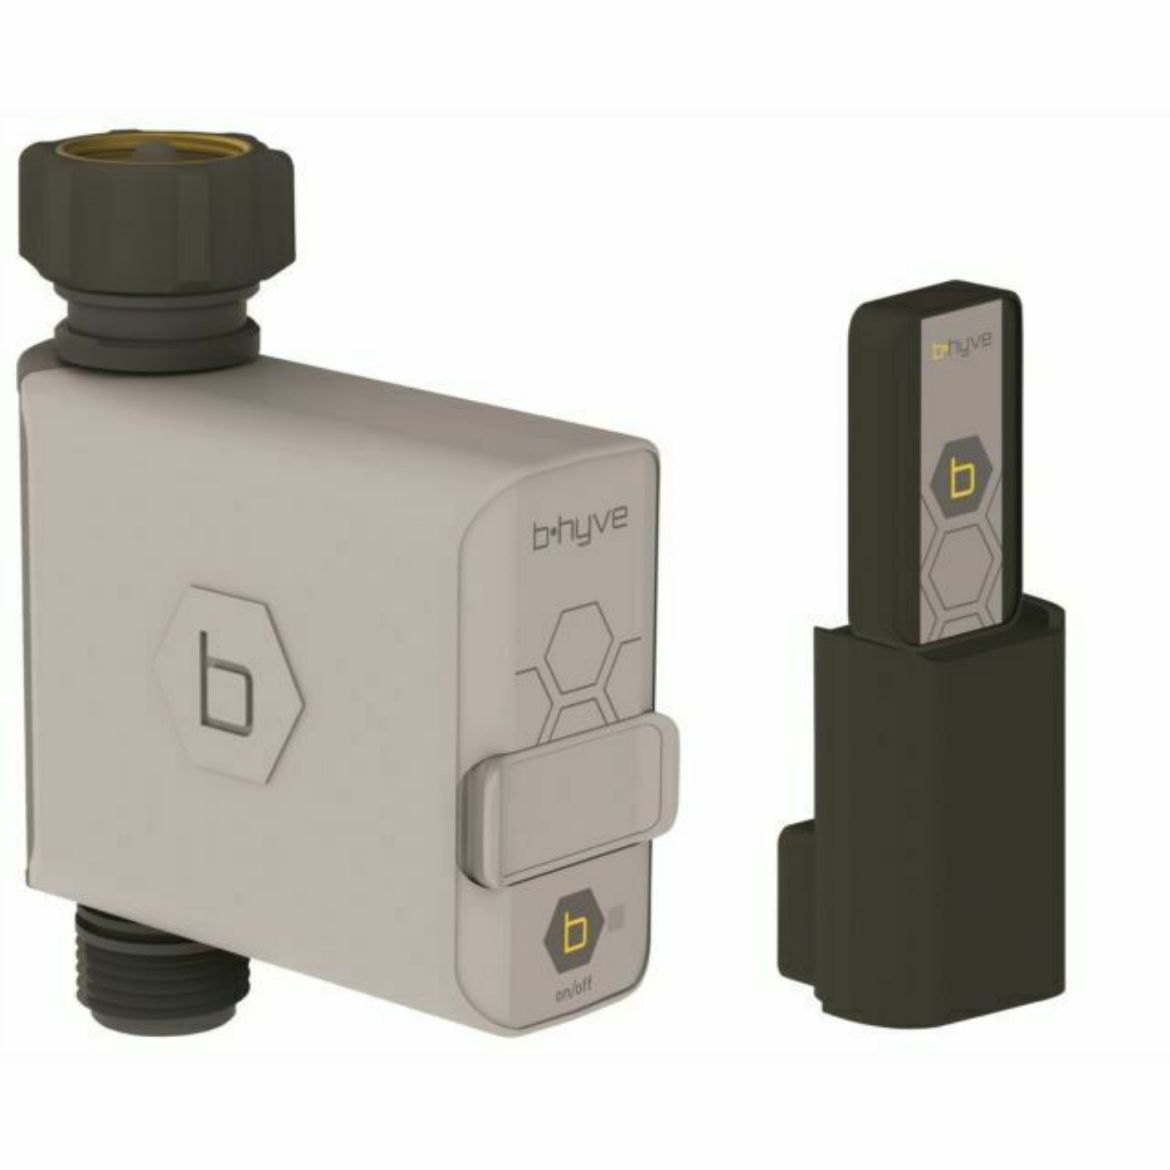 Picture of TAP TIMER BHYVE BLUETOOTH BATTERY OPERATED C/W WIFI HUB